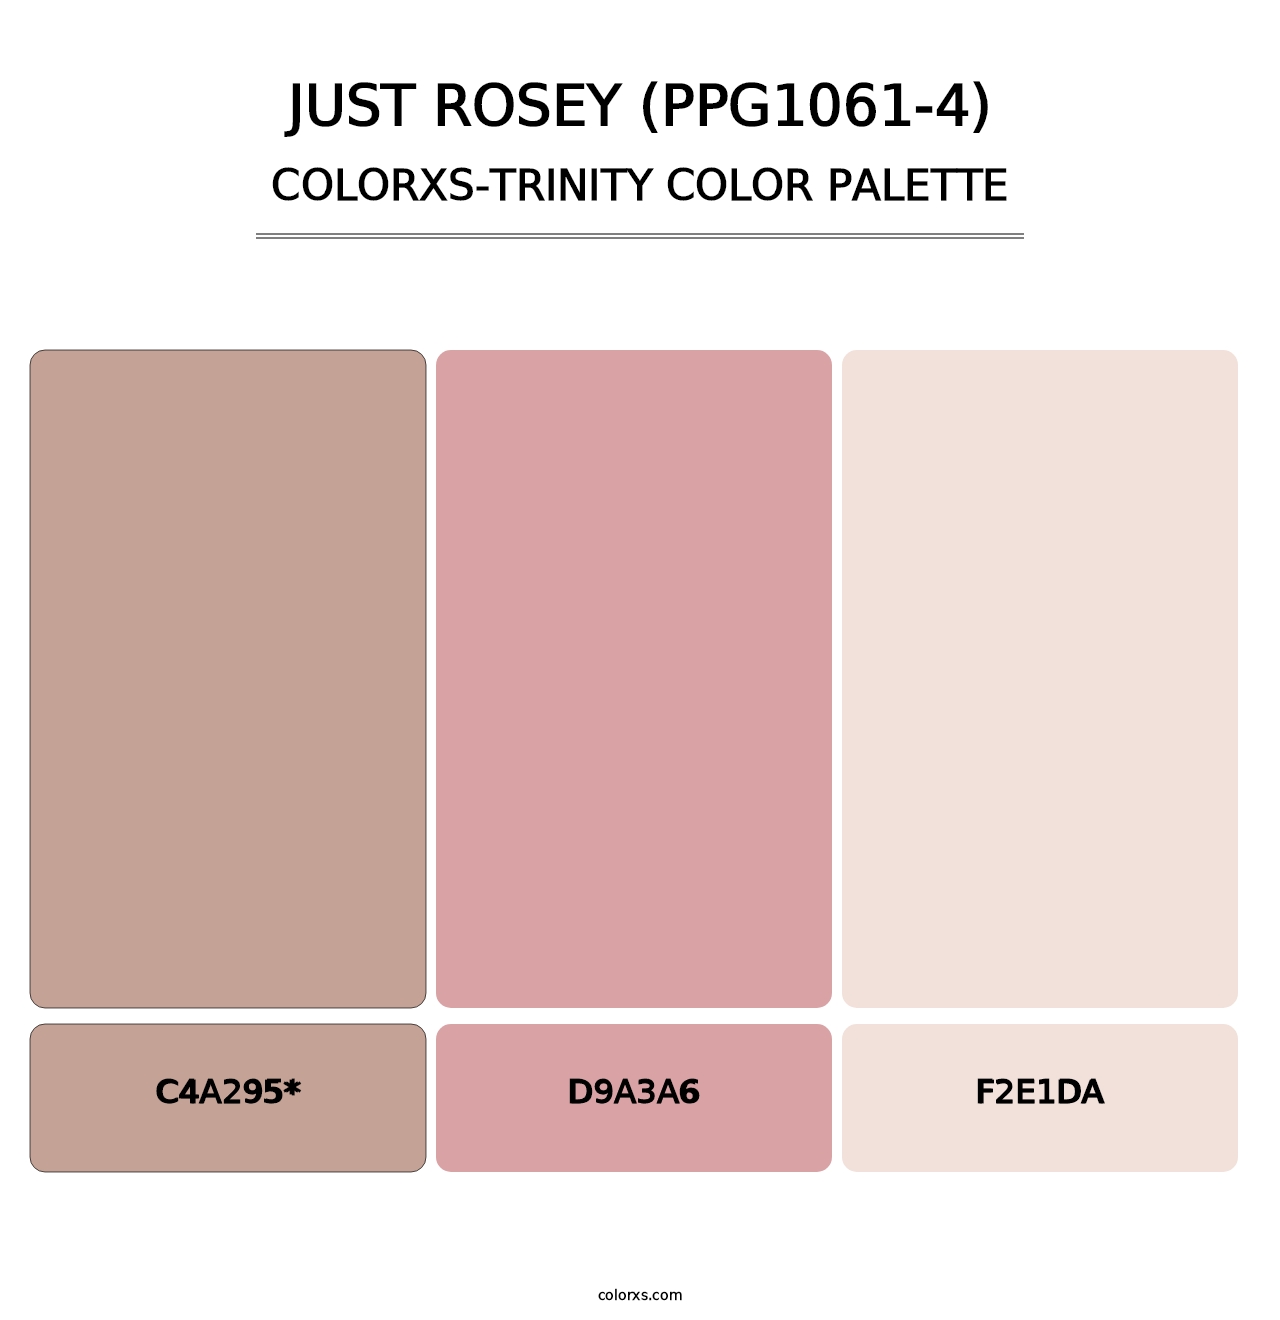 Just Rosey (PPG1061-4) - Colorxs Trinity Palette